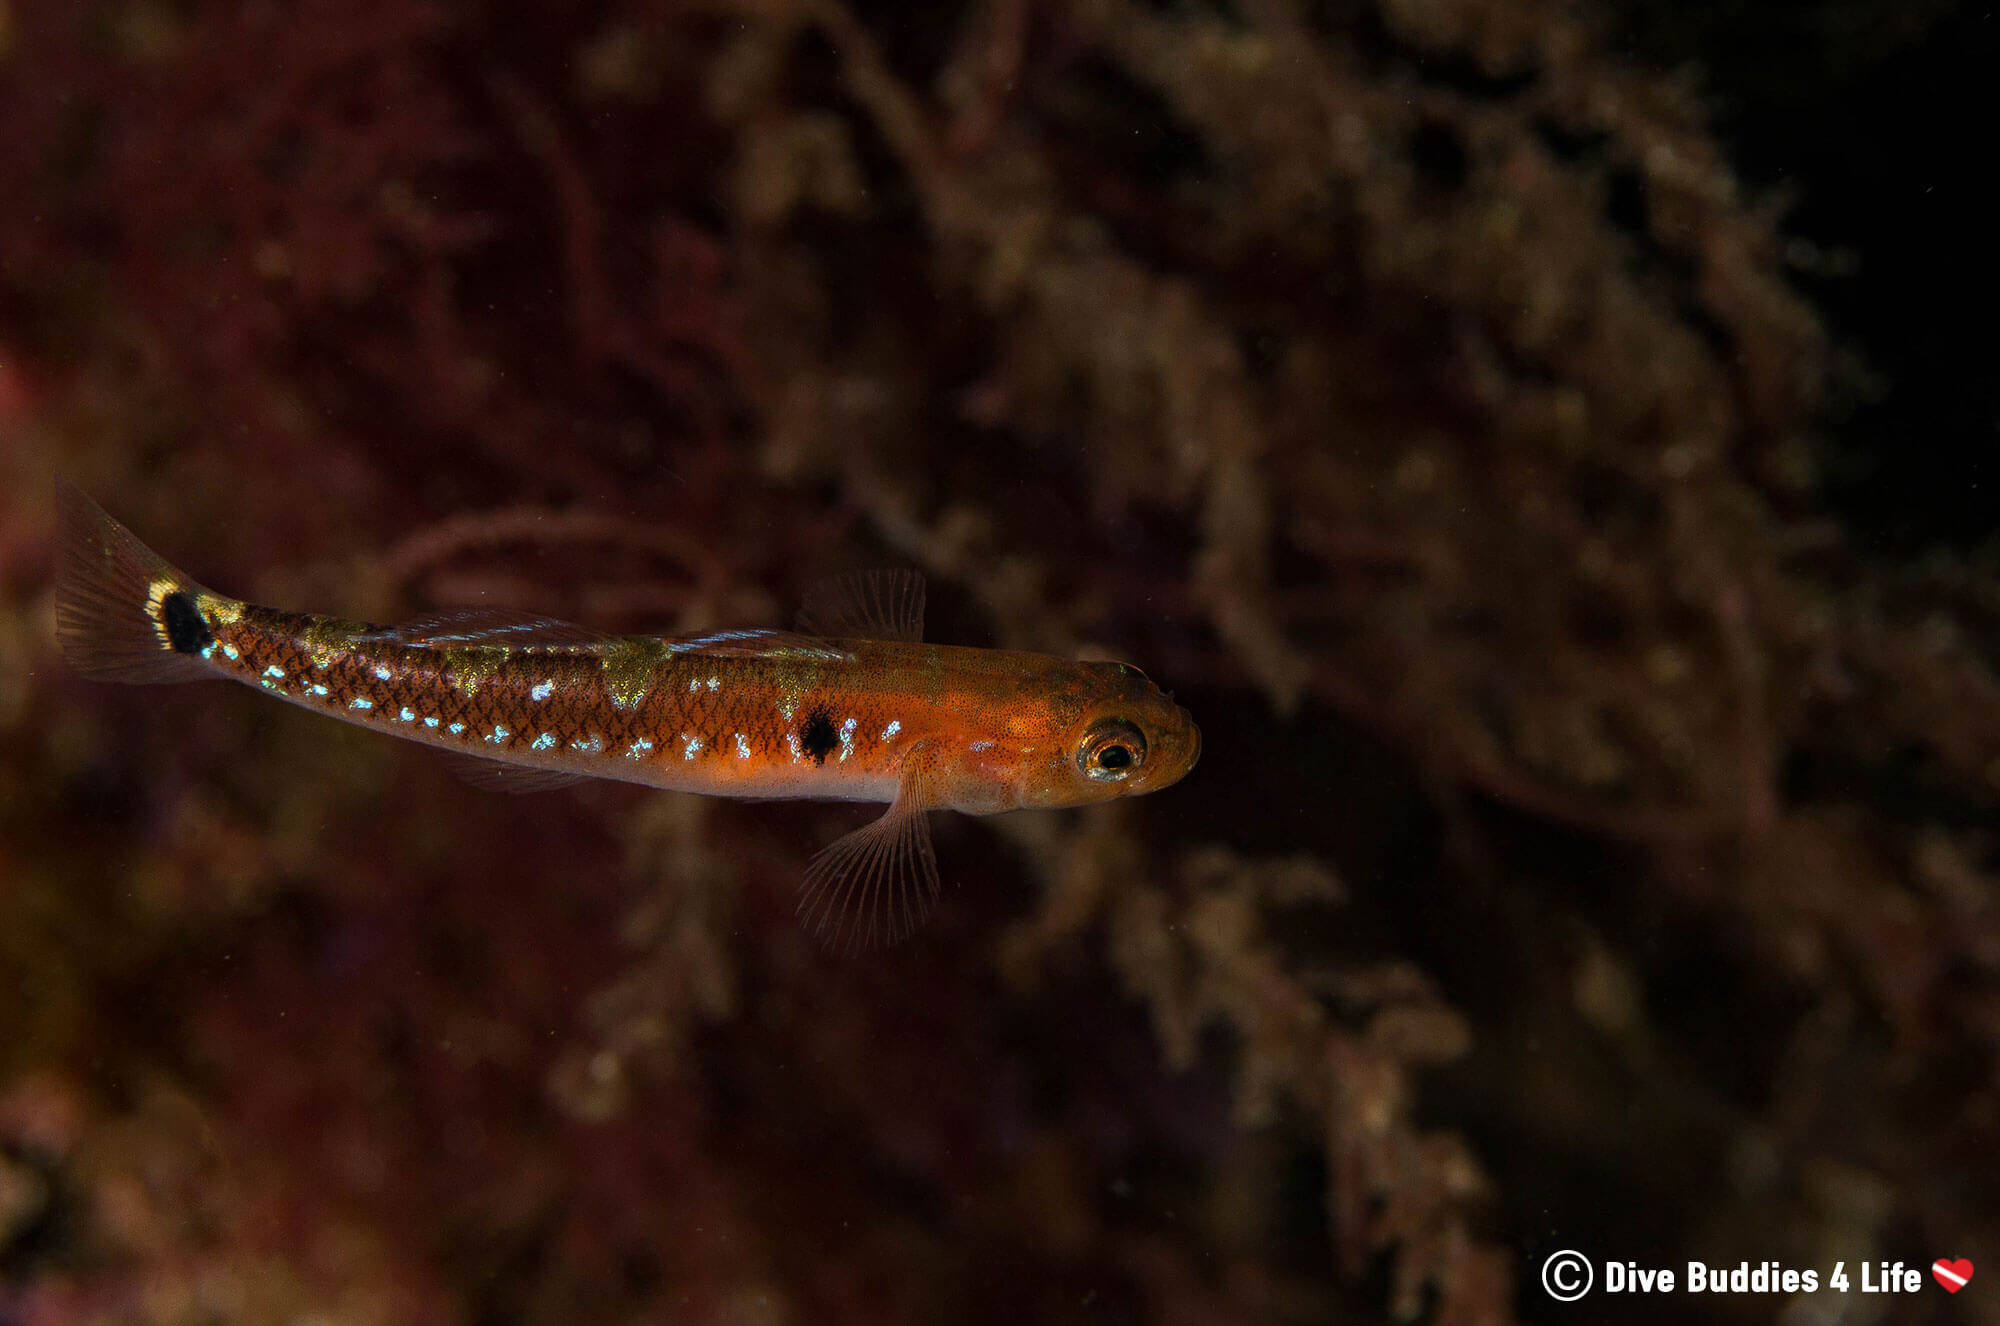 Scuba Diving and Spotting a Small Minnow Fish While in the Cold Water of Portugal 